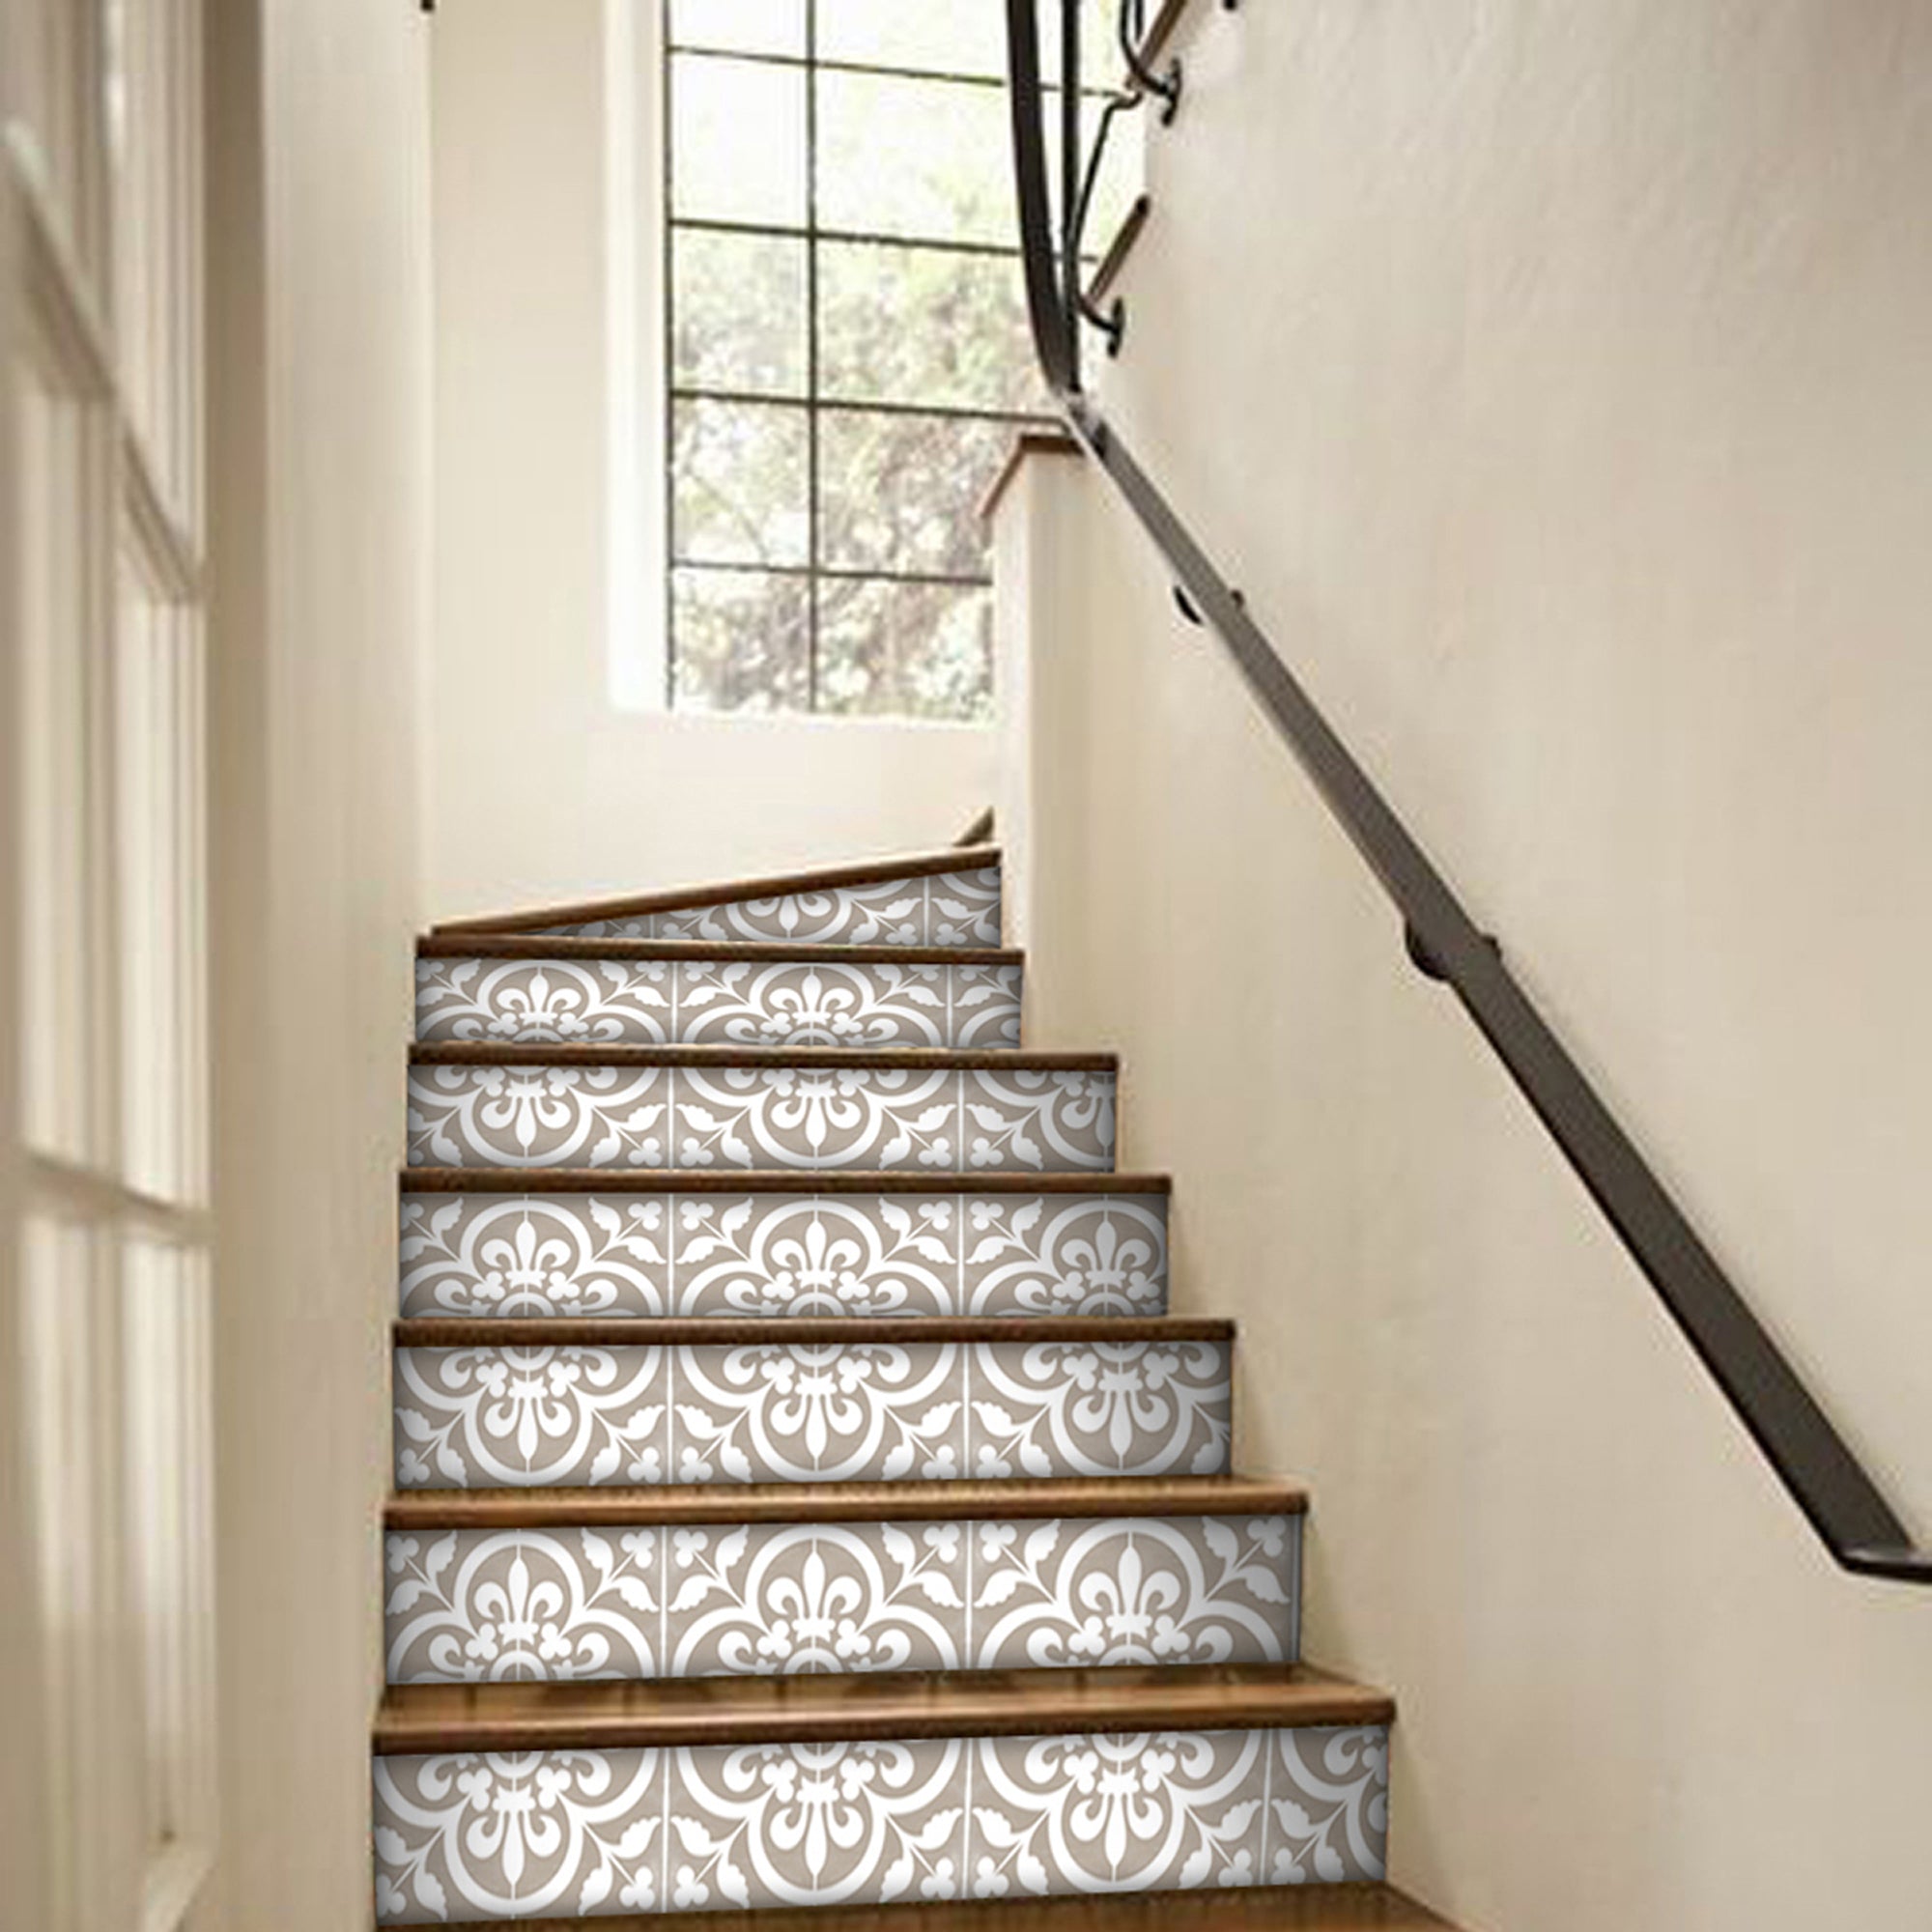 PROMO! Corona in Chateau Stair Riser Stickers - 6 strips in 12.5 cm height x 120 cm long